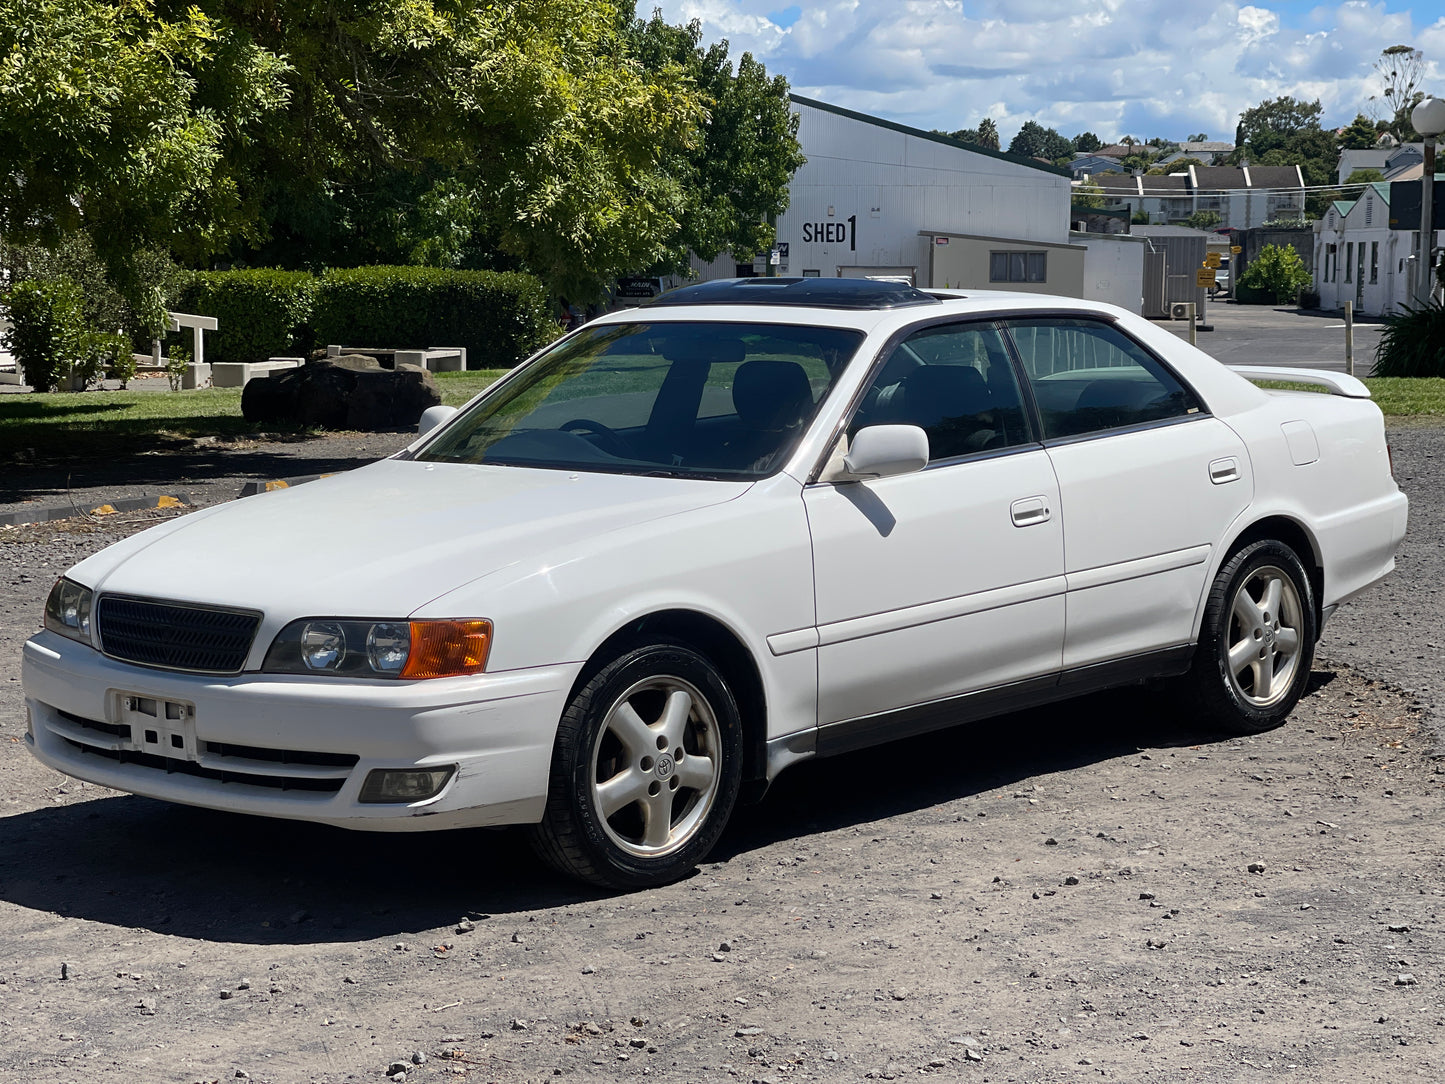 Toyota Chaser Tourer V Auto with Sunroof - 1998